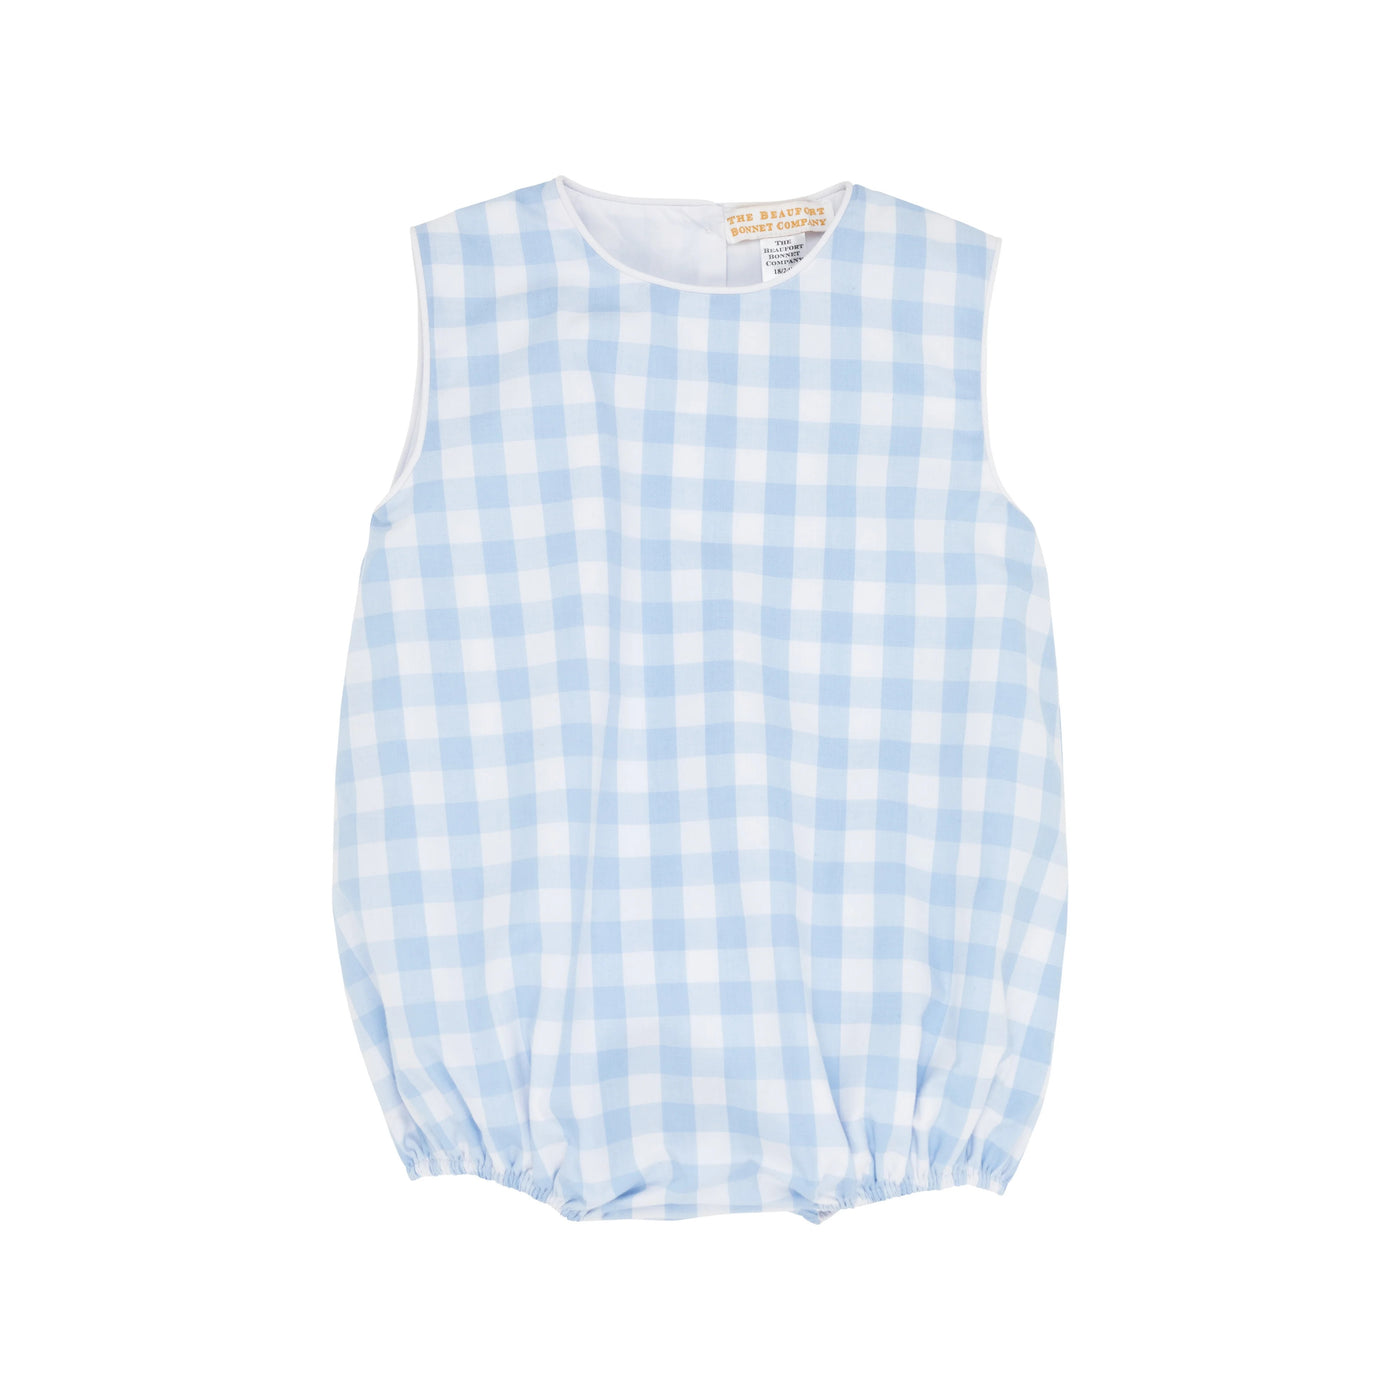 Benjamin Bubble - Beale Street Blue Check With Worth Avenue White